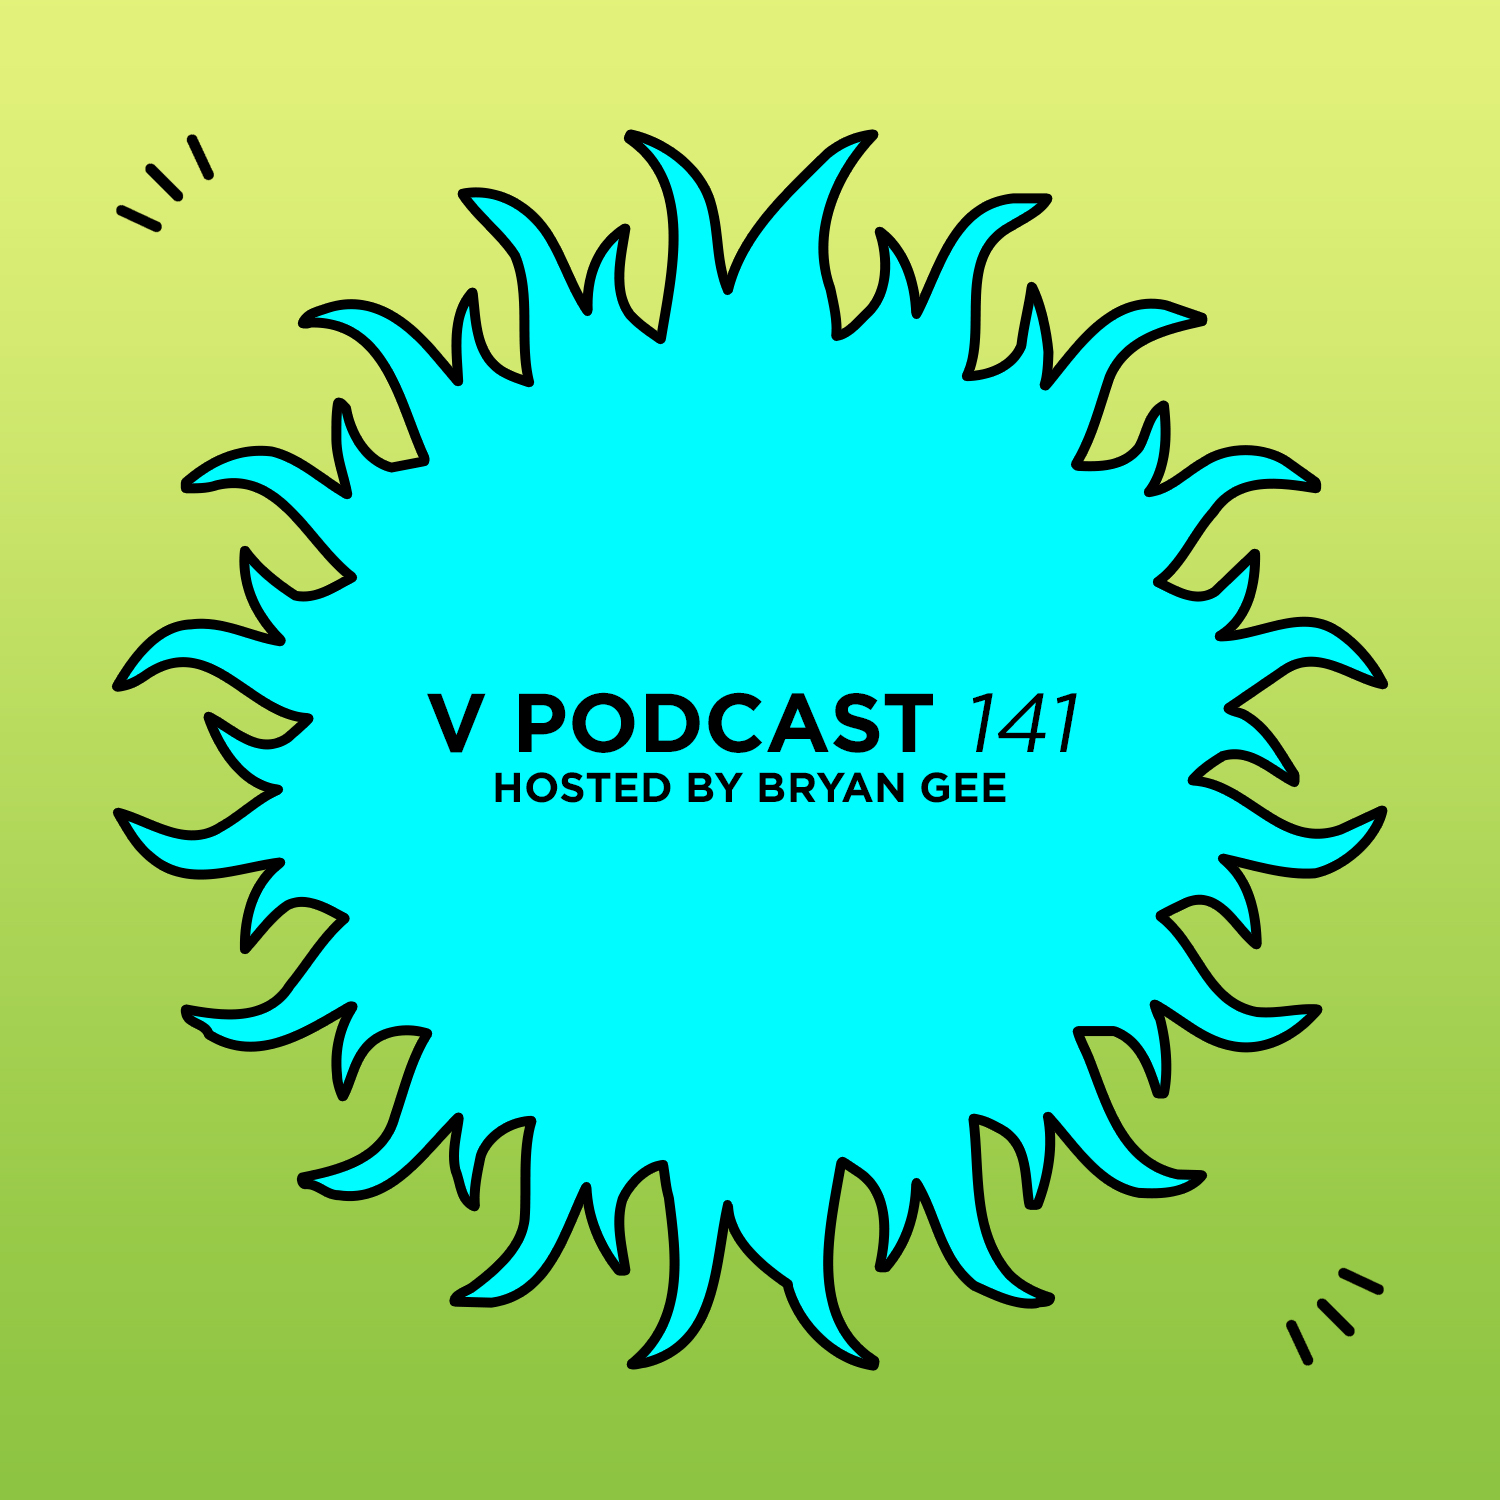 V Podcast 141 - Hosted by Bryan Gee Artwork